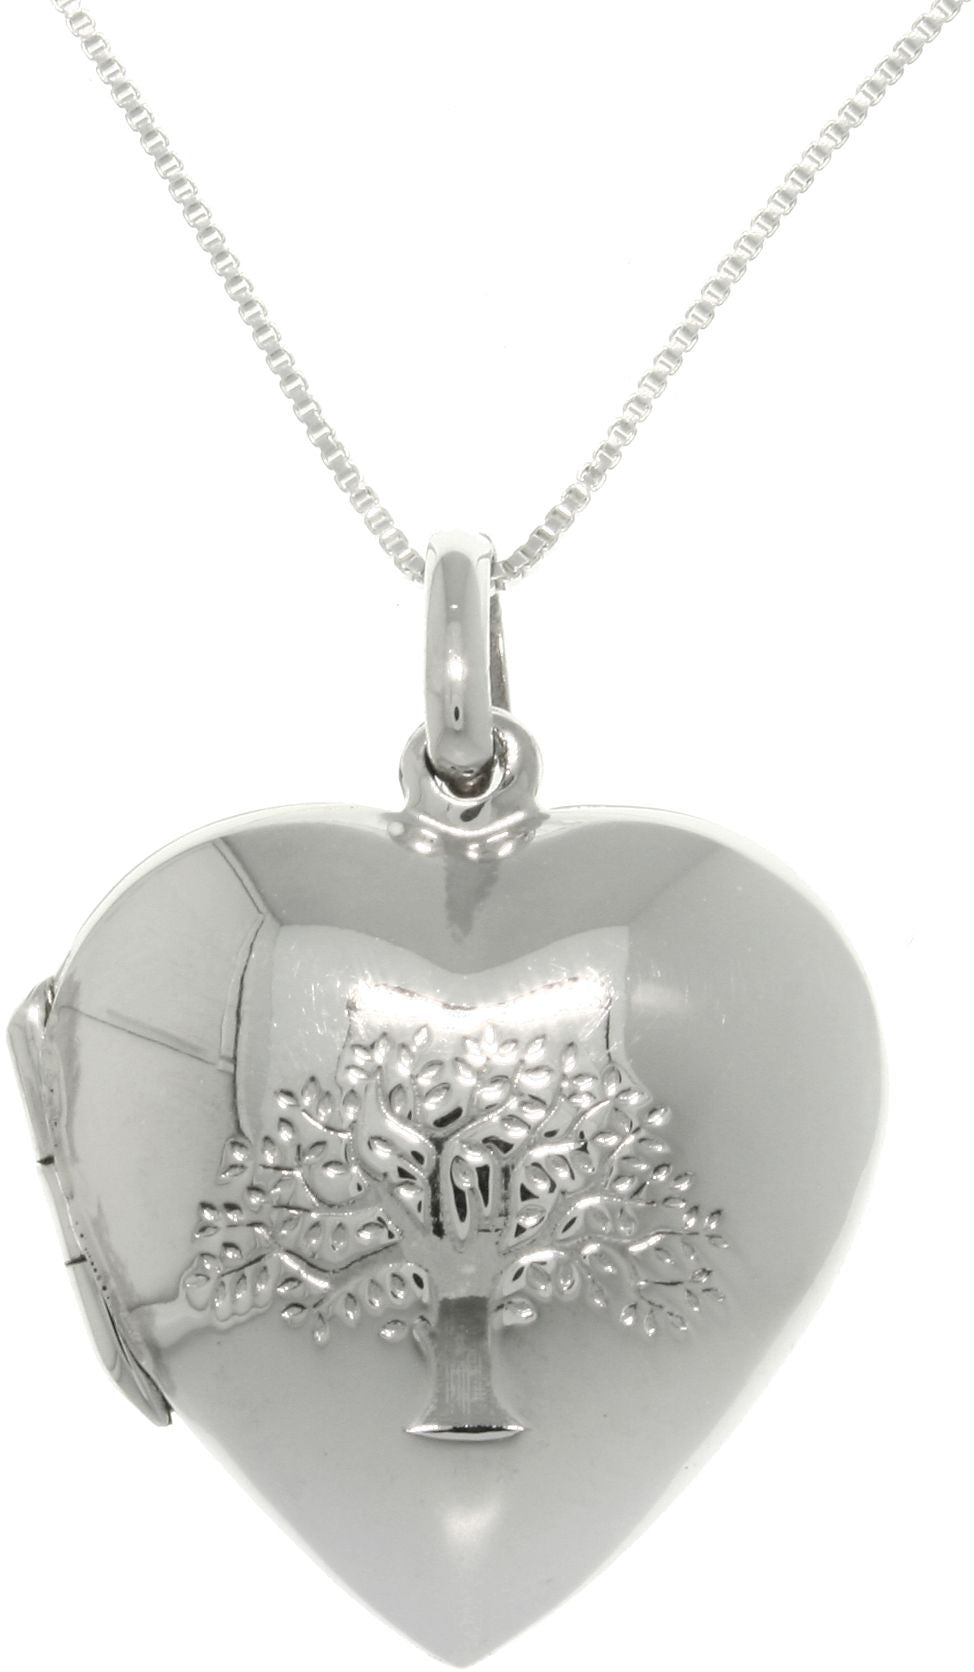 Jewelry Trends Sterling Silver Tree of Life Heart Locket Pendant with 18 Inch Chain Necklace